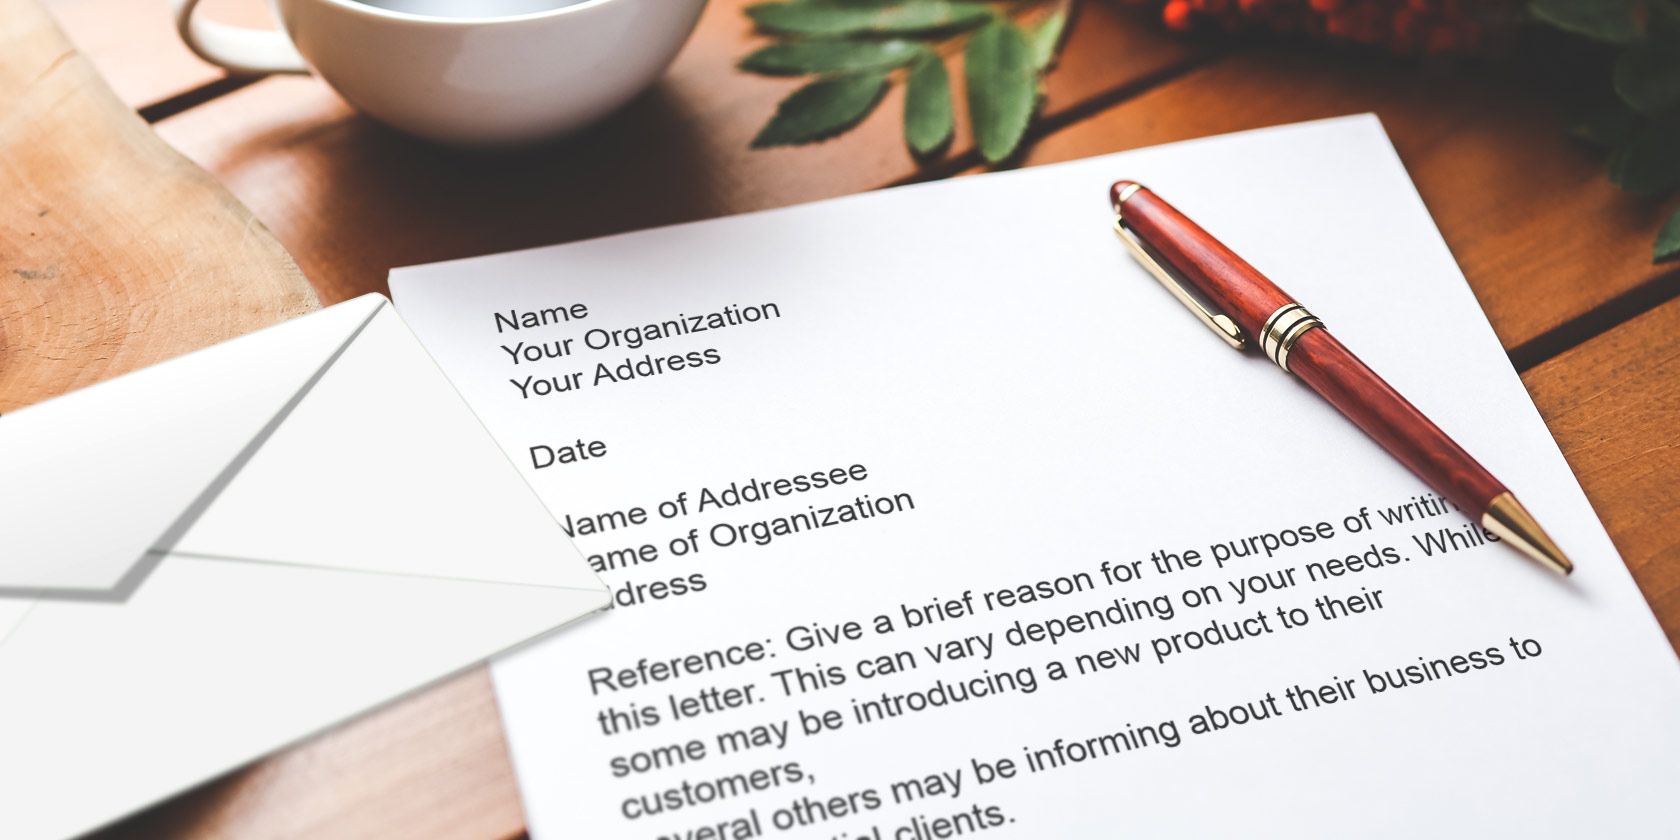 An image of a business letter sample on top of a table